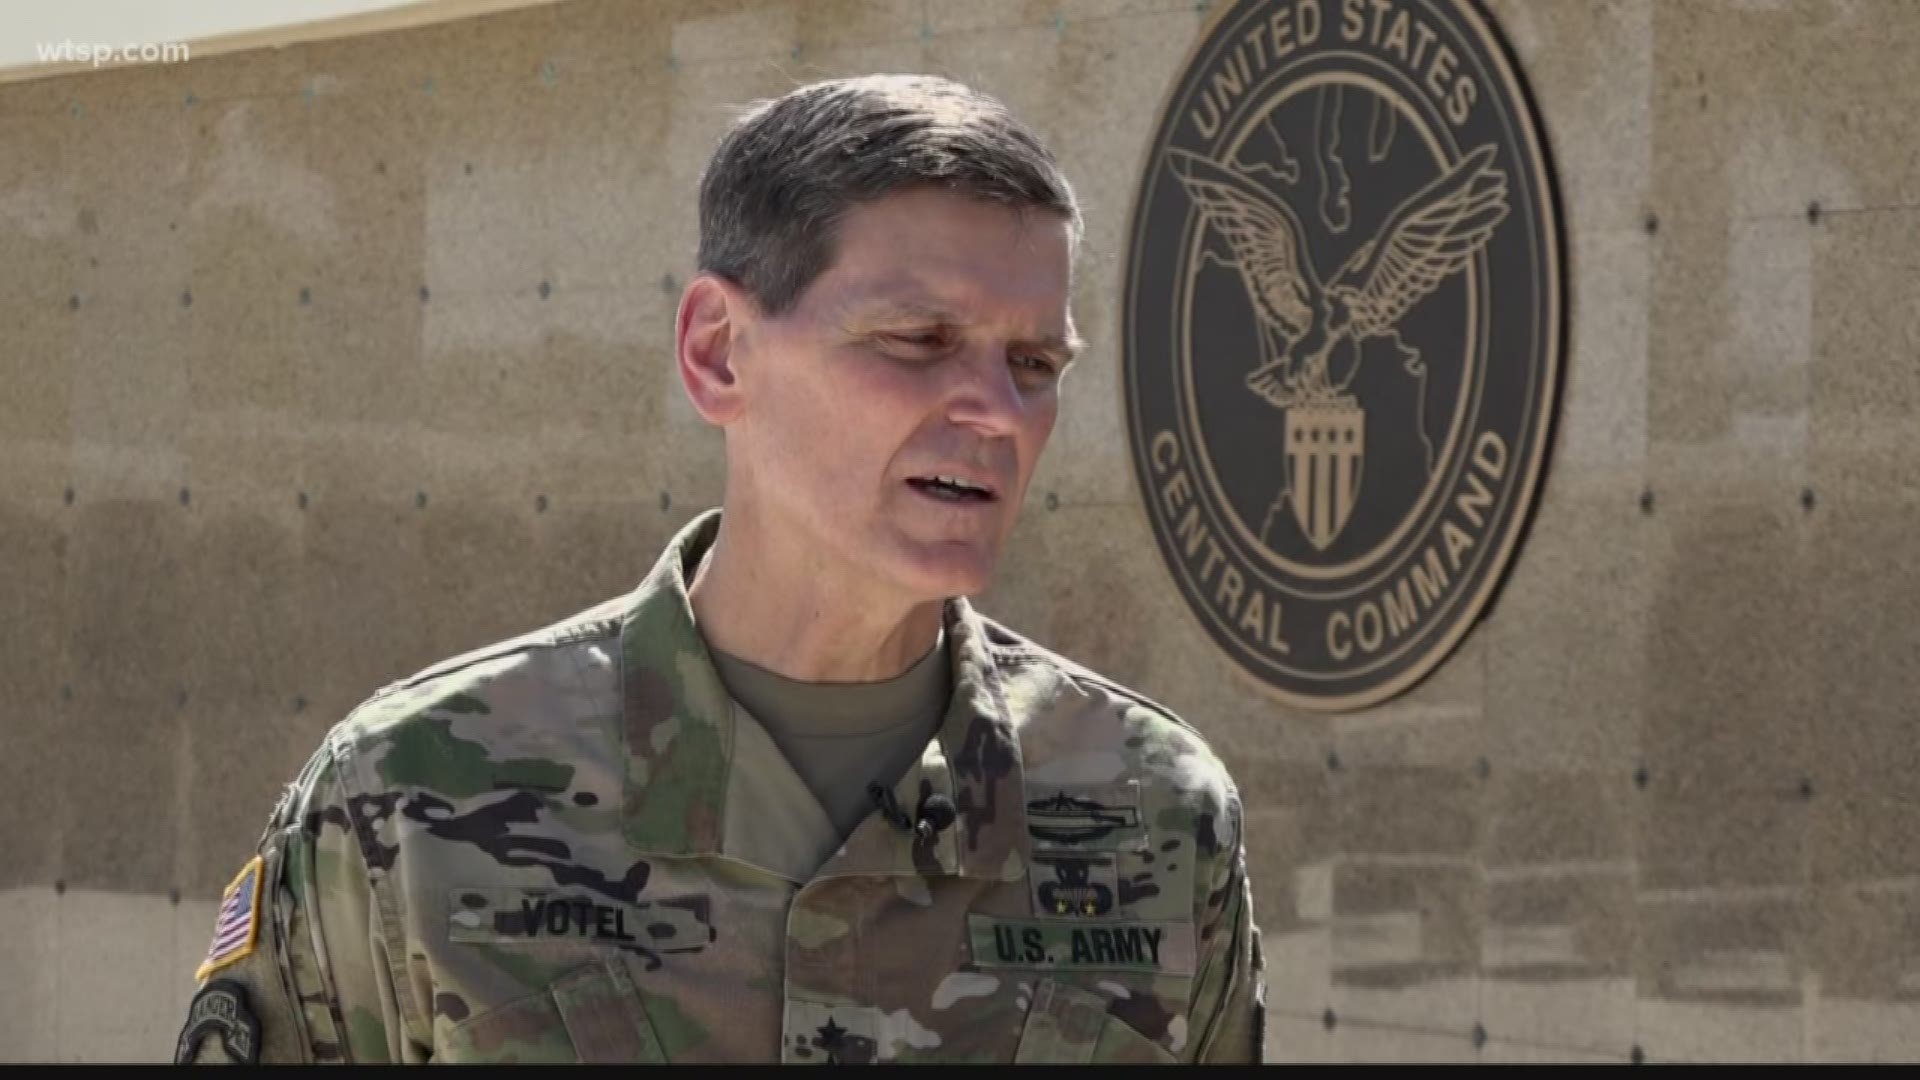 Four-star General Joseph Votel and the senior enlisted officer at U.S. Central Command, SGM Bill Thetford, gave a final address to enlisted troops at the CENTCOM memorial.